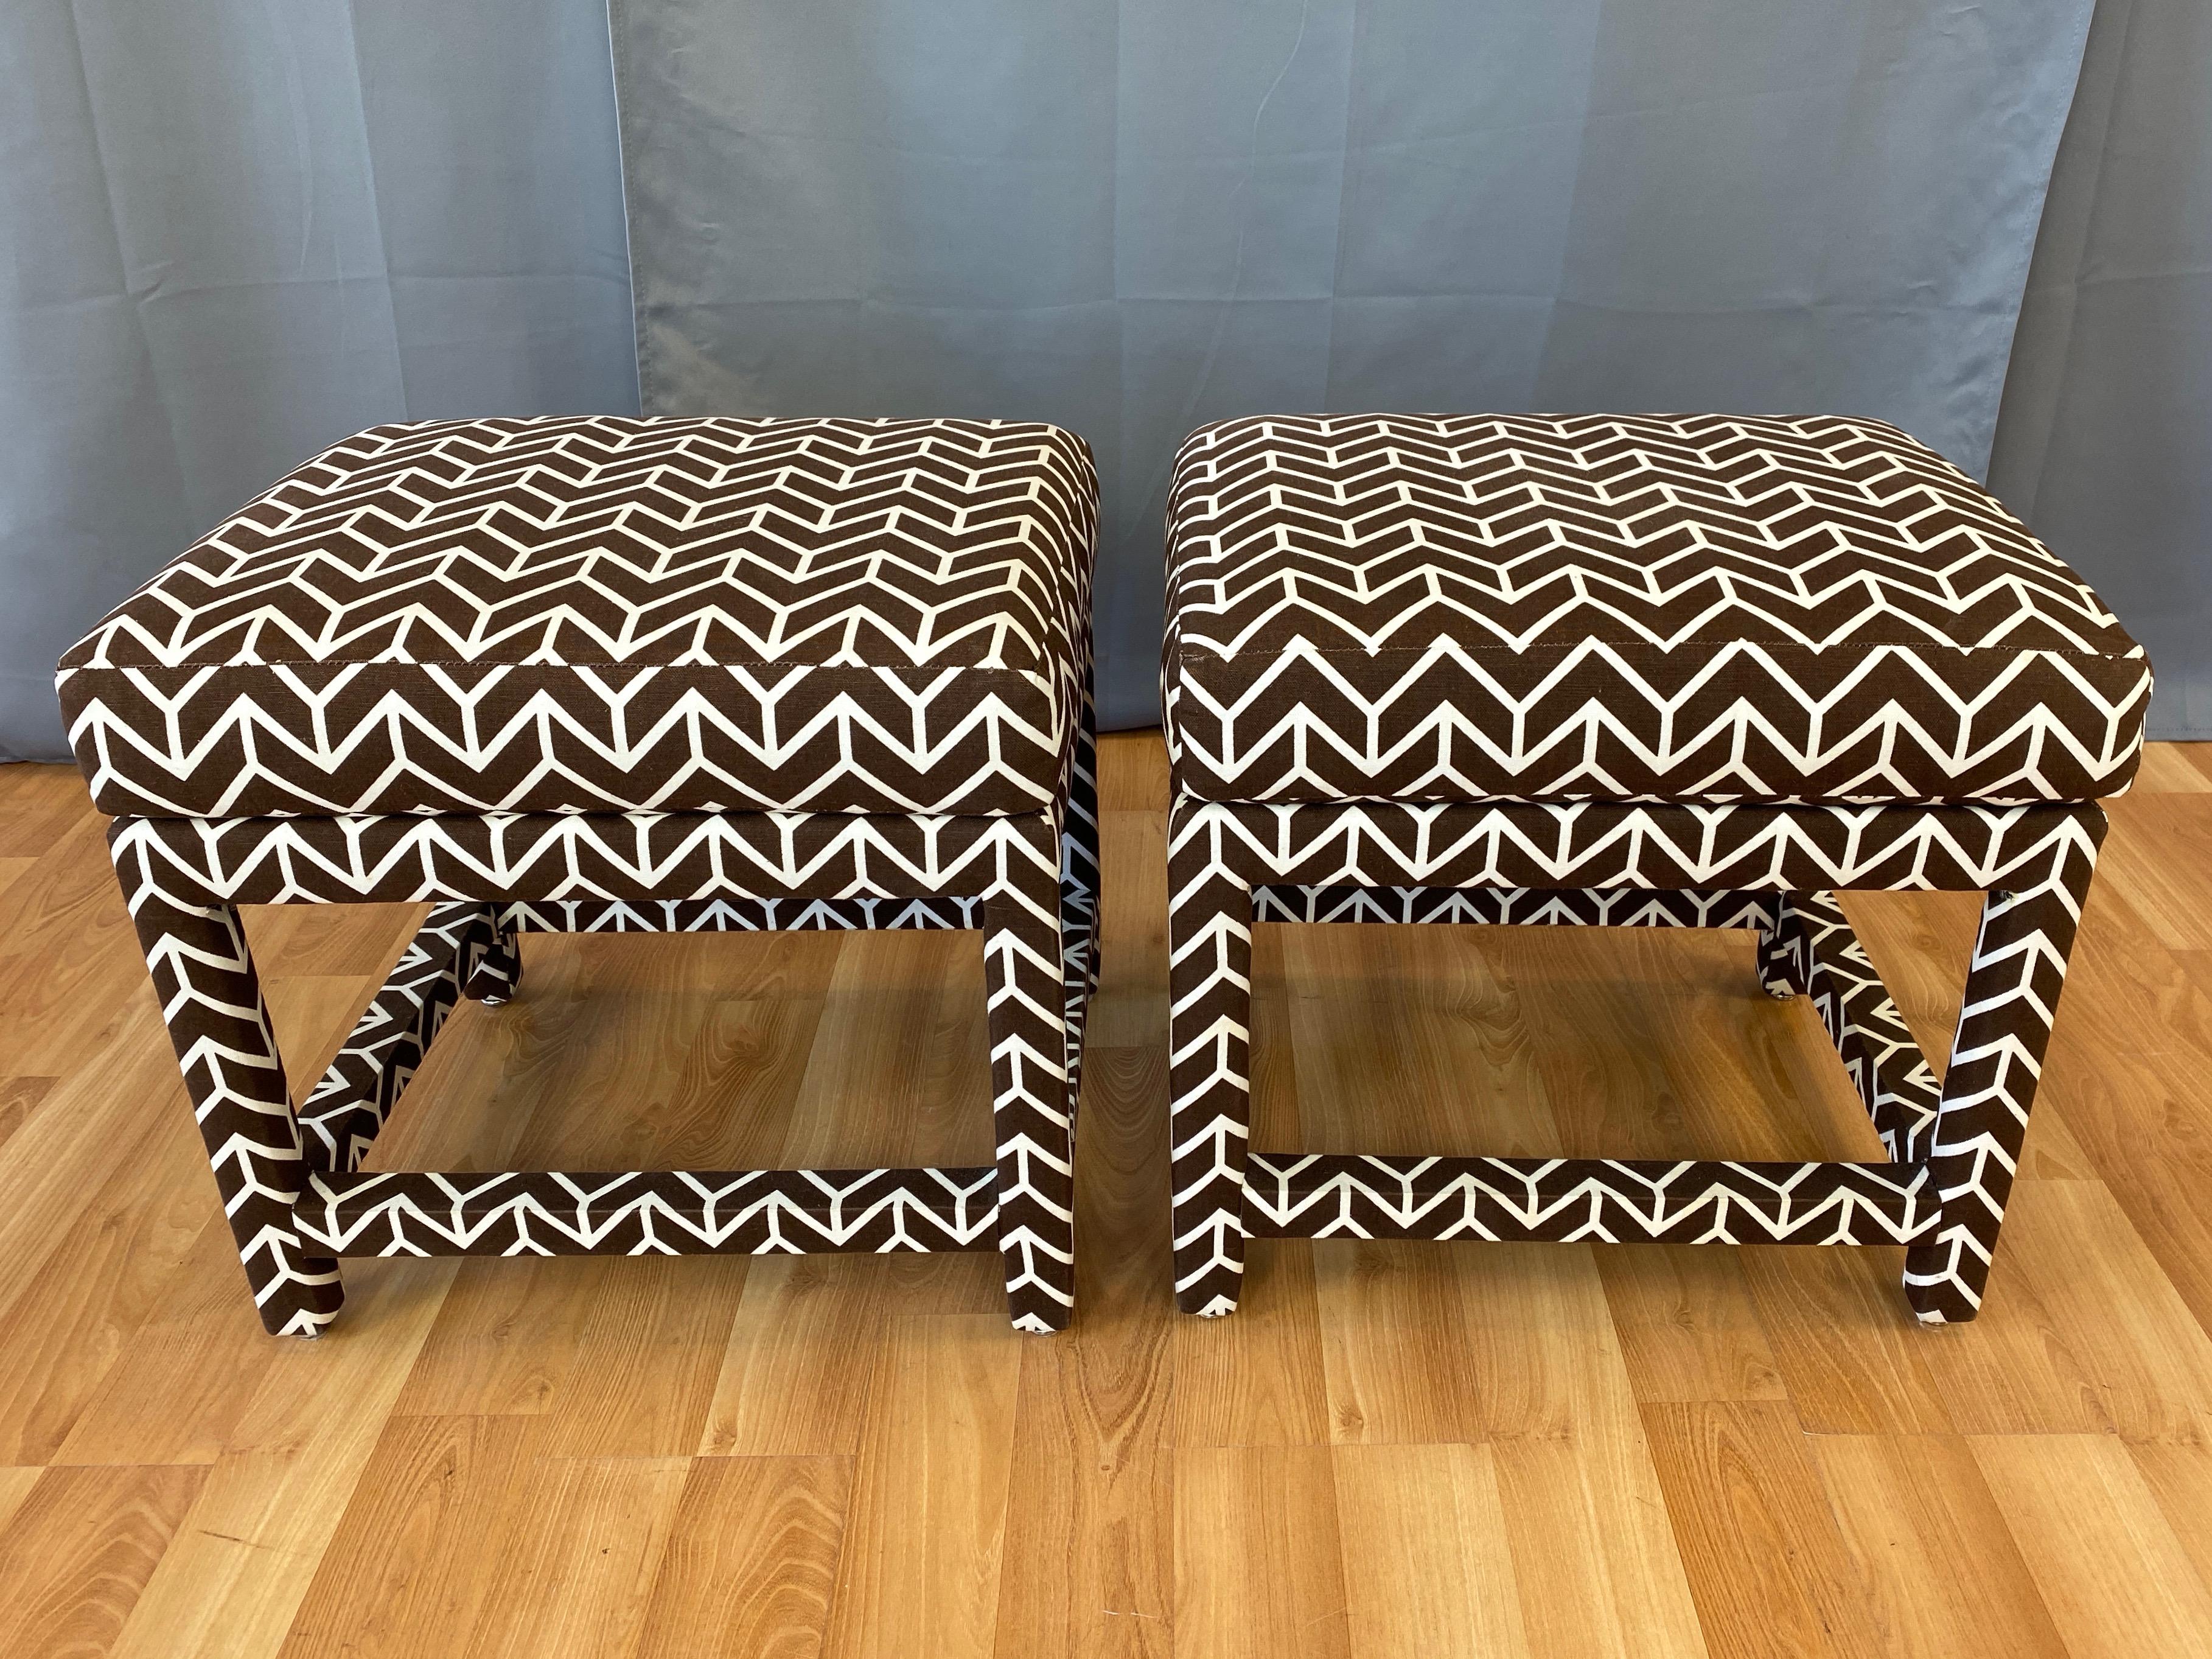 Hollywood Regency Pair of Milo Baughman for Thayer Coggin Ottomans with David Hicks Upholstery